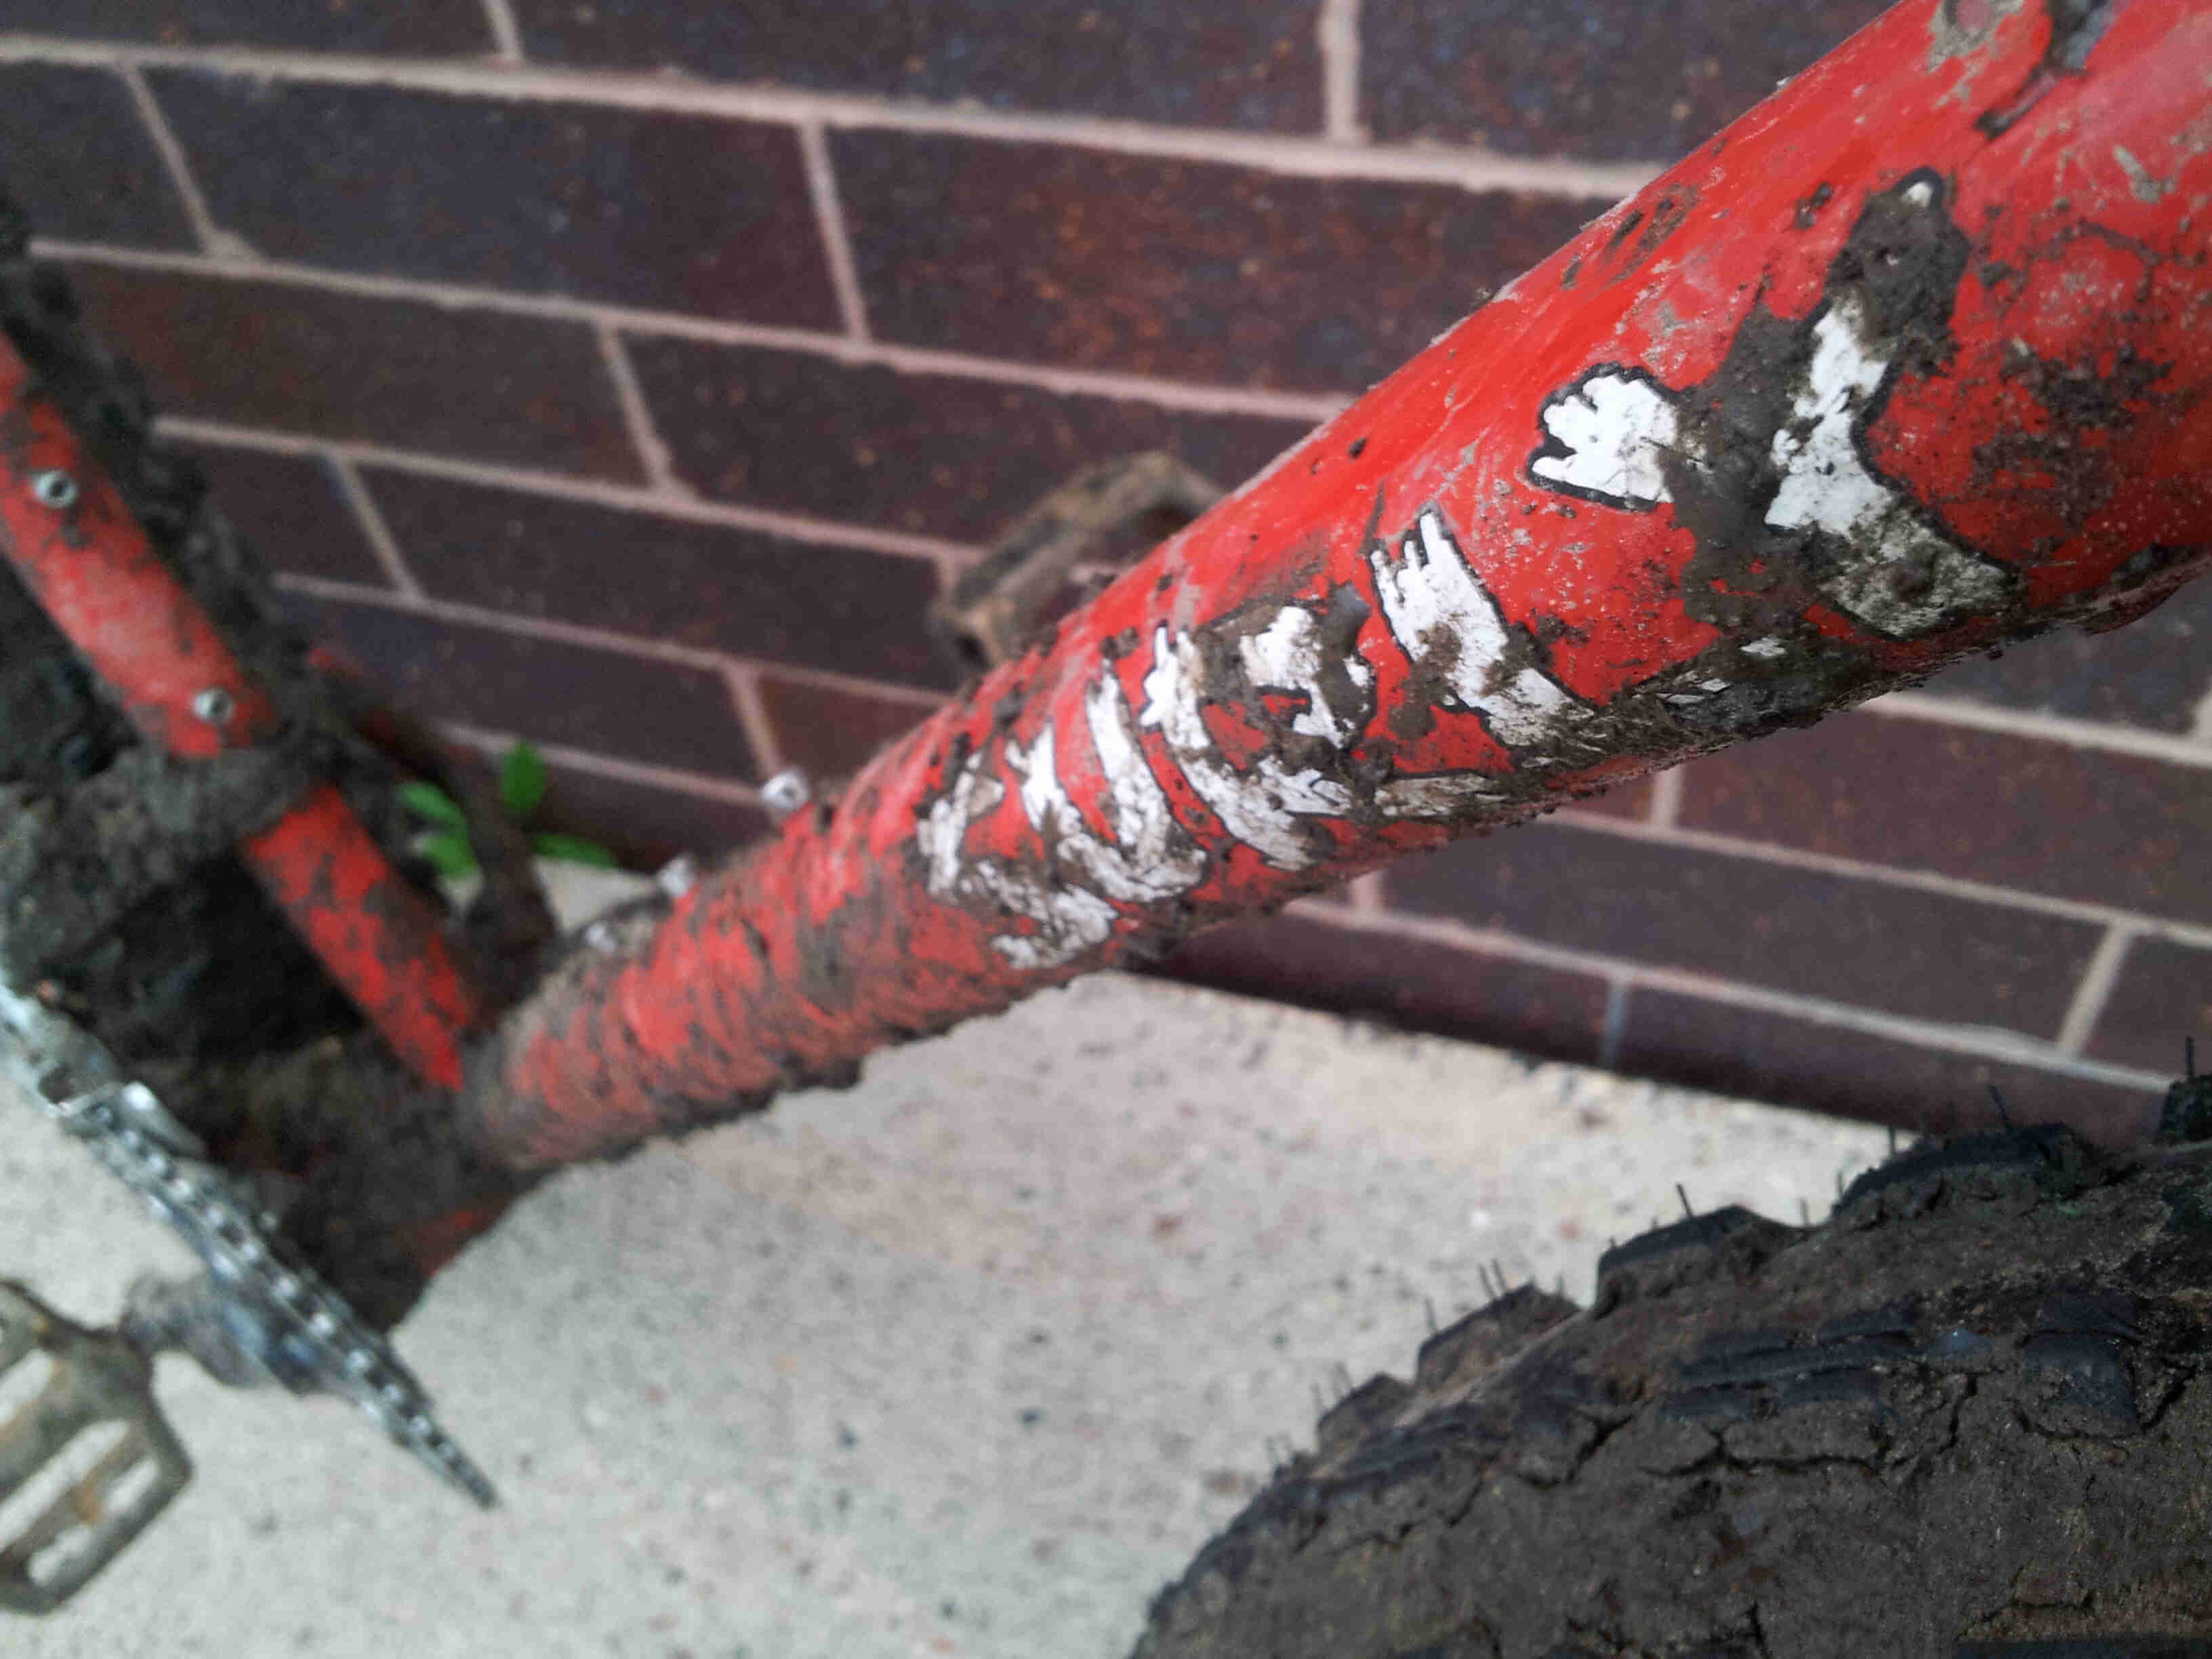 Close up, right side view of the muddy downtube of a red Surly Moonlander fat bike, with a brick wall behind it